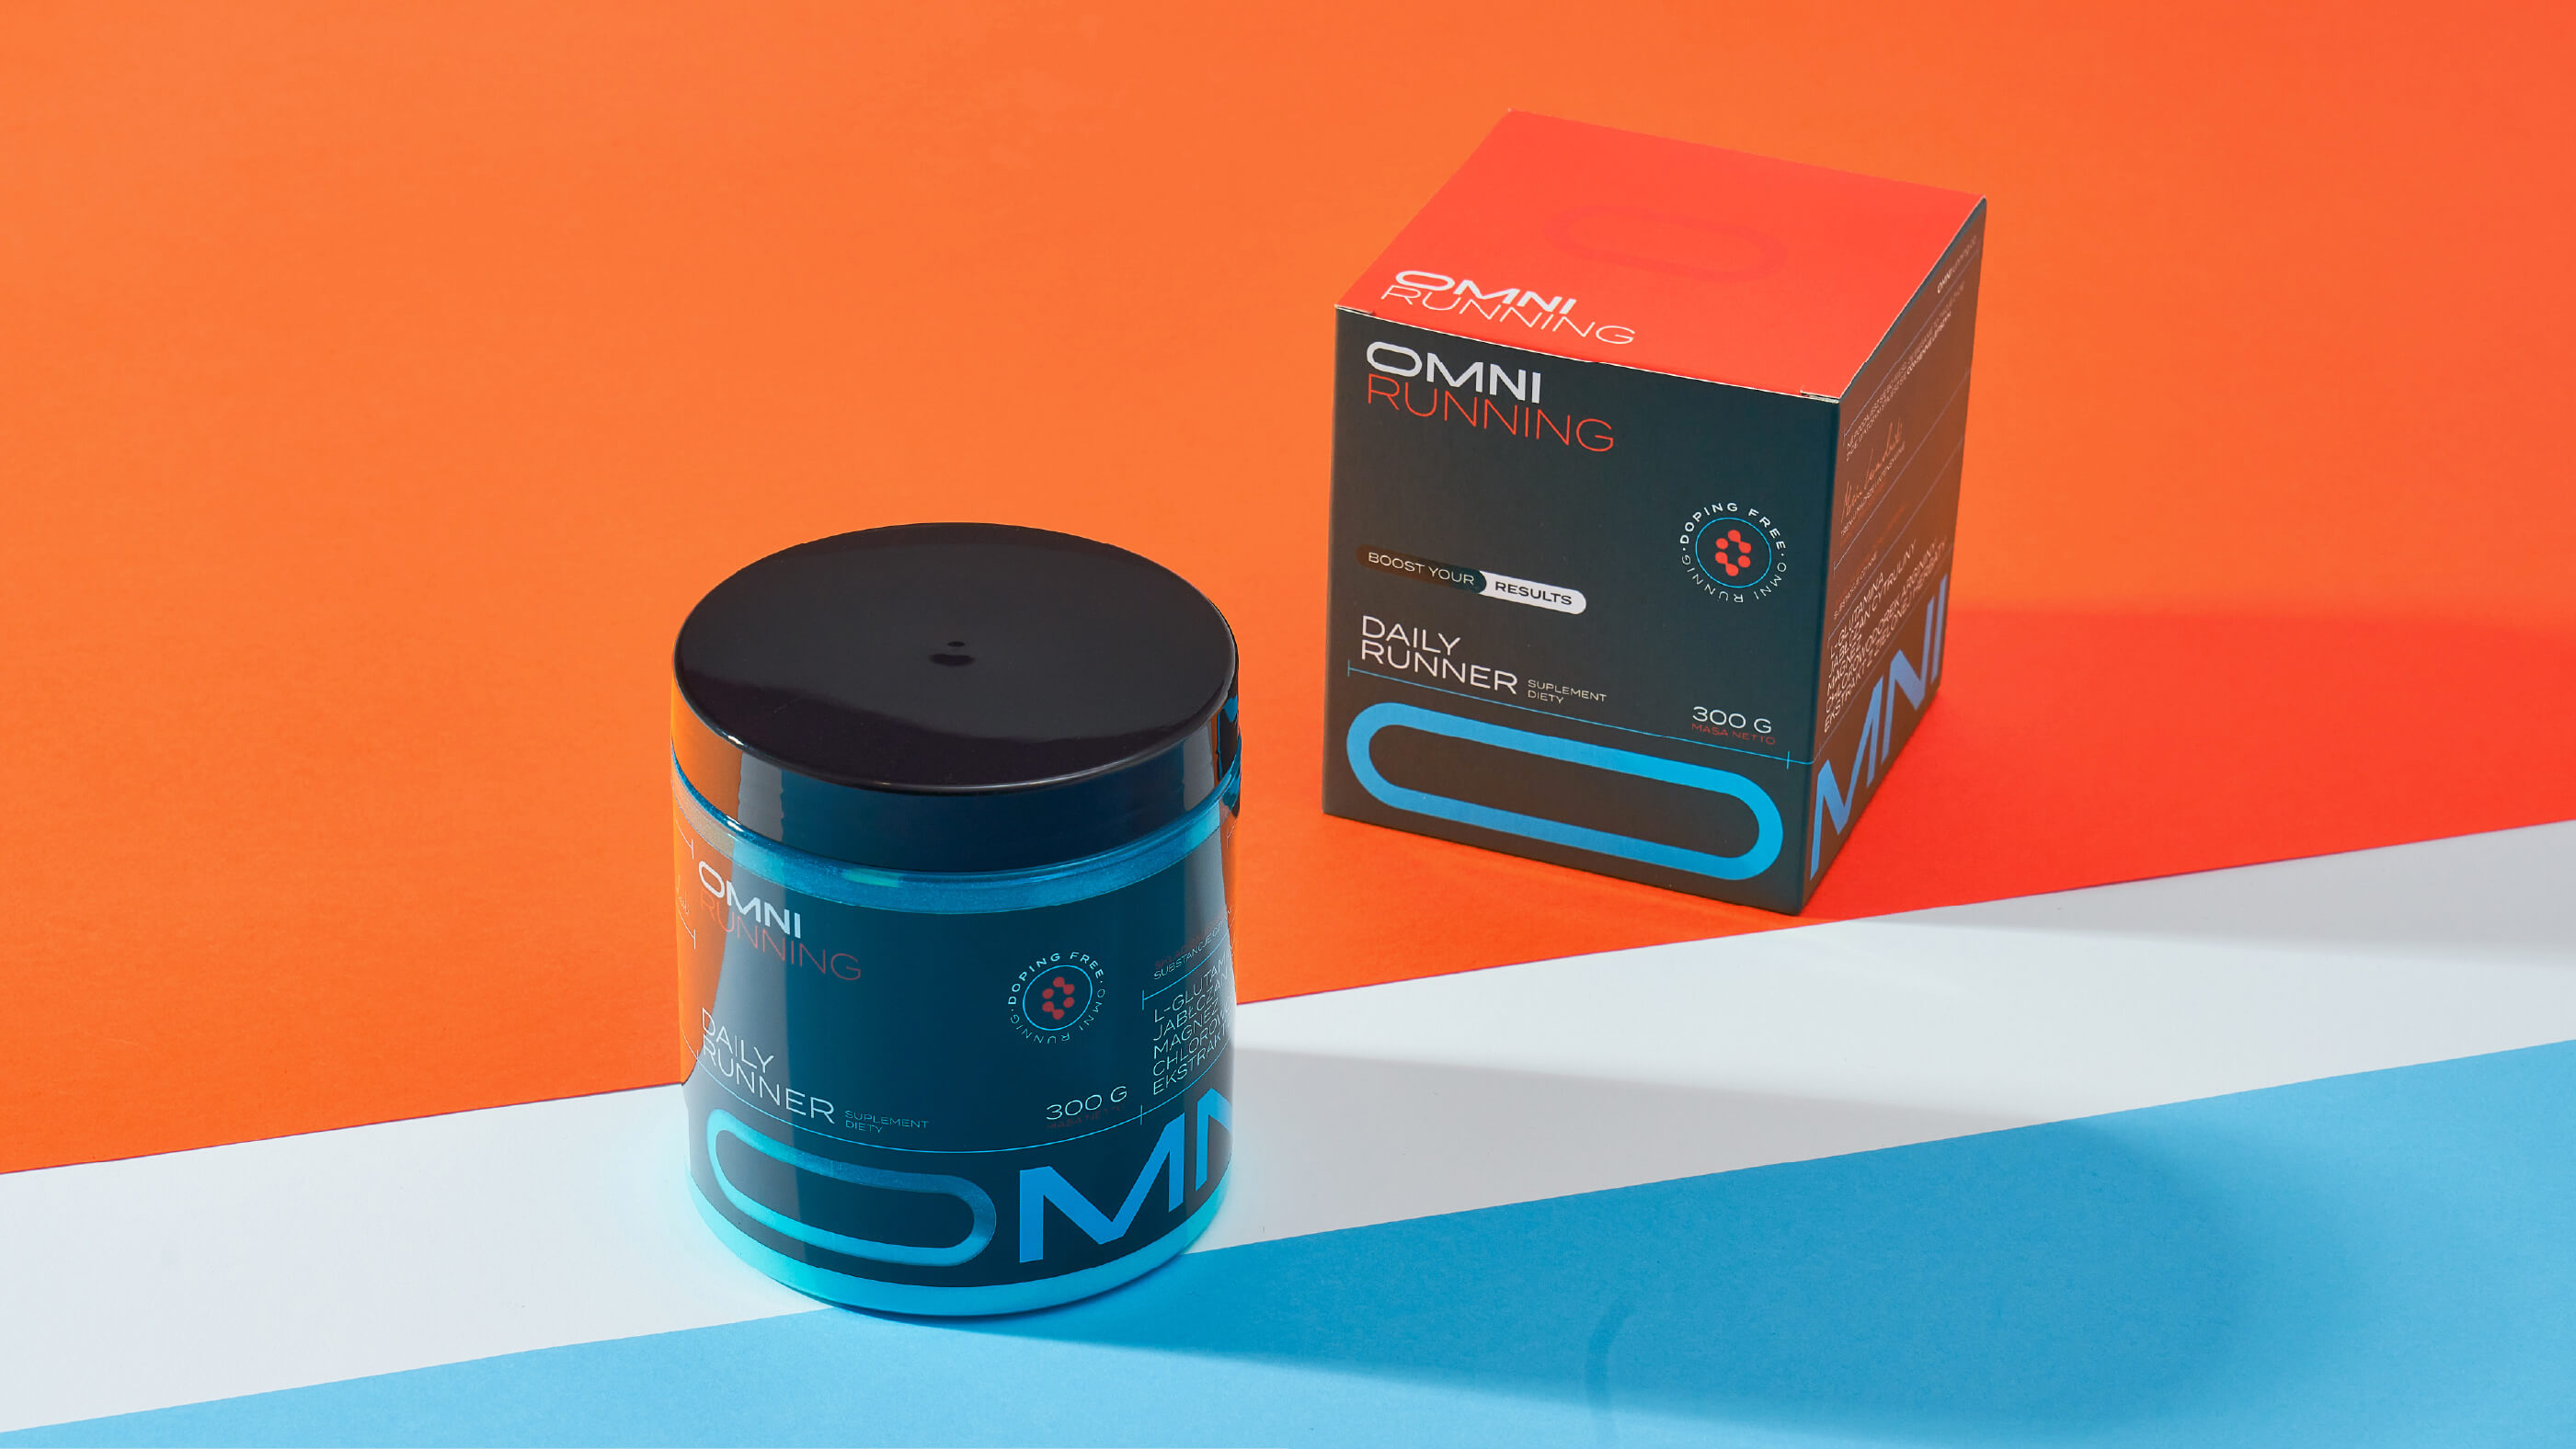 Branding and Packaging Design for Omni Running by we3studio